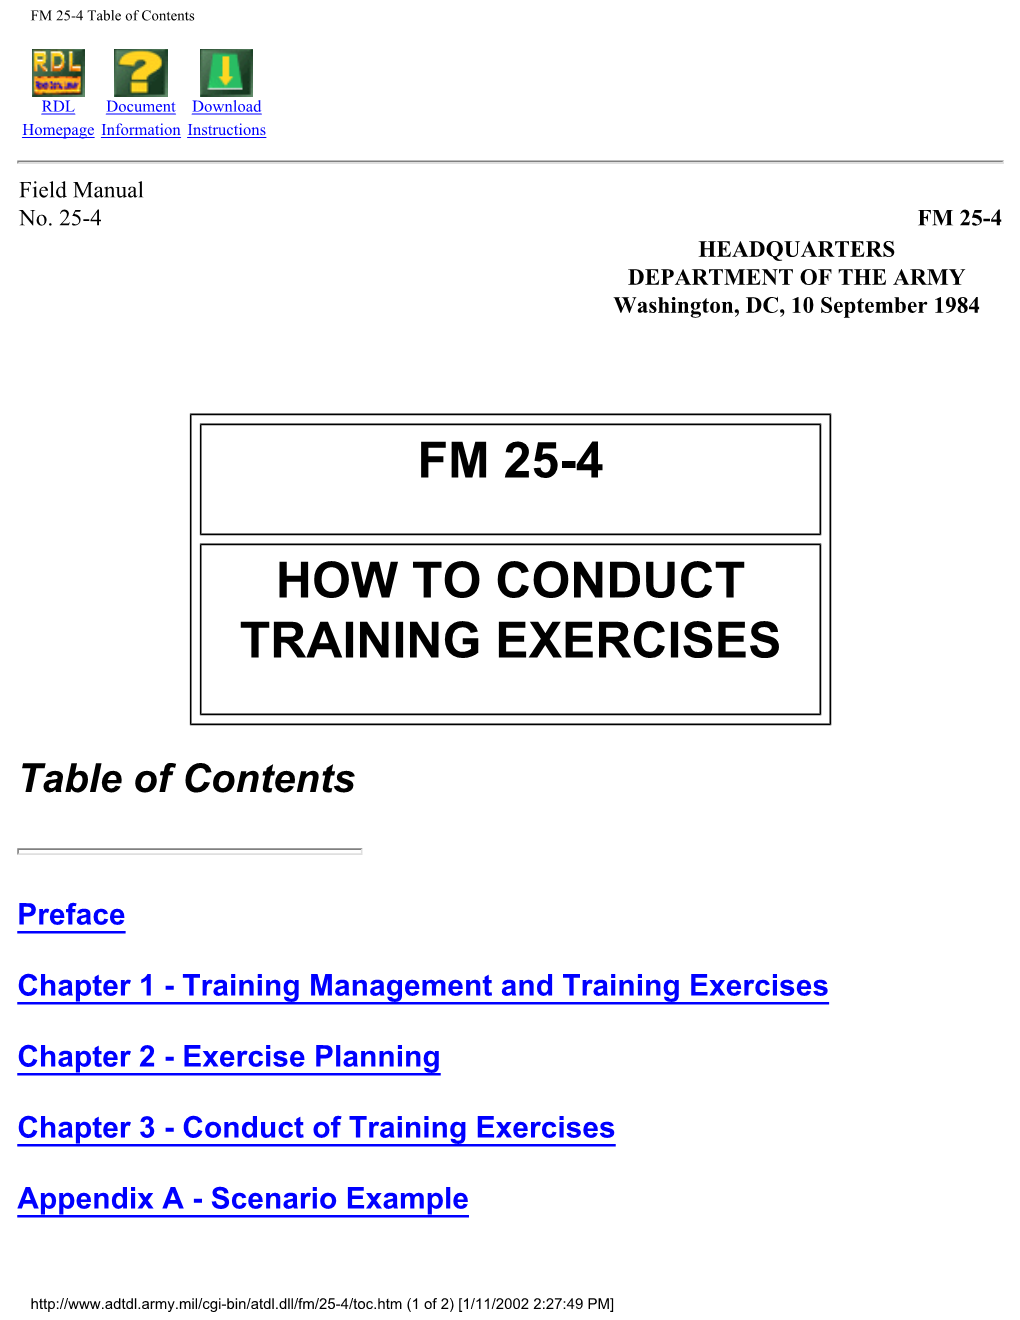 FM 25-4 How to Conduct Training Exercises